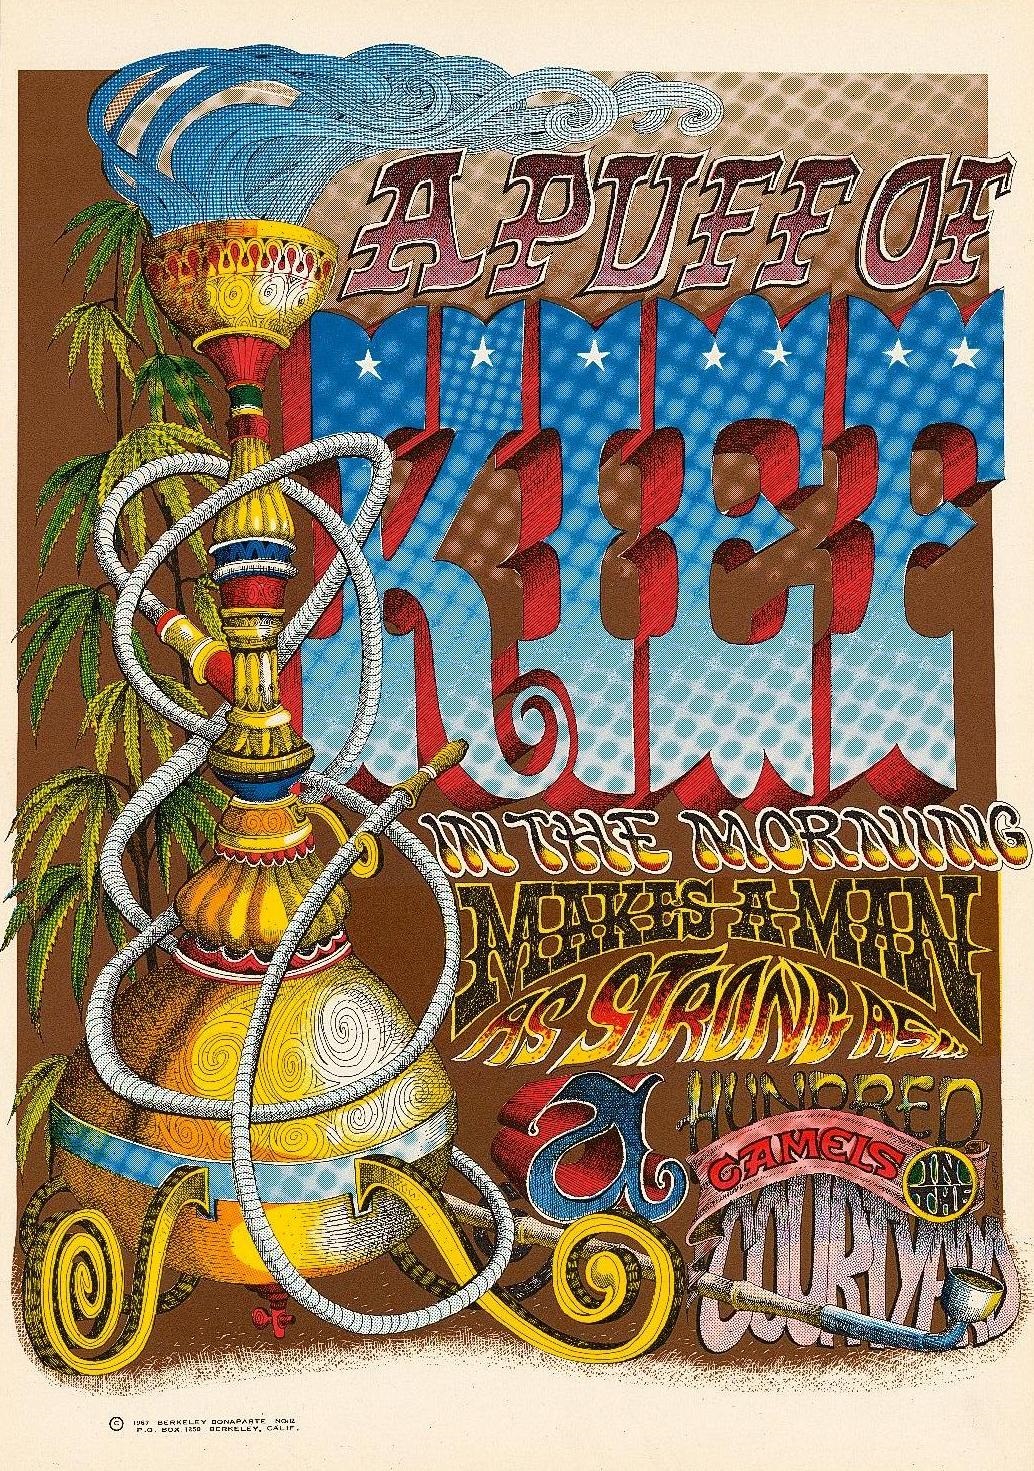 High Art: Looking back at marijuana-themed posters of the 1960s